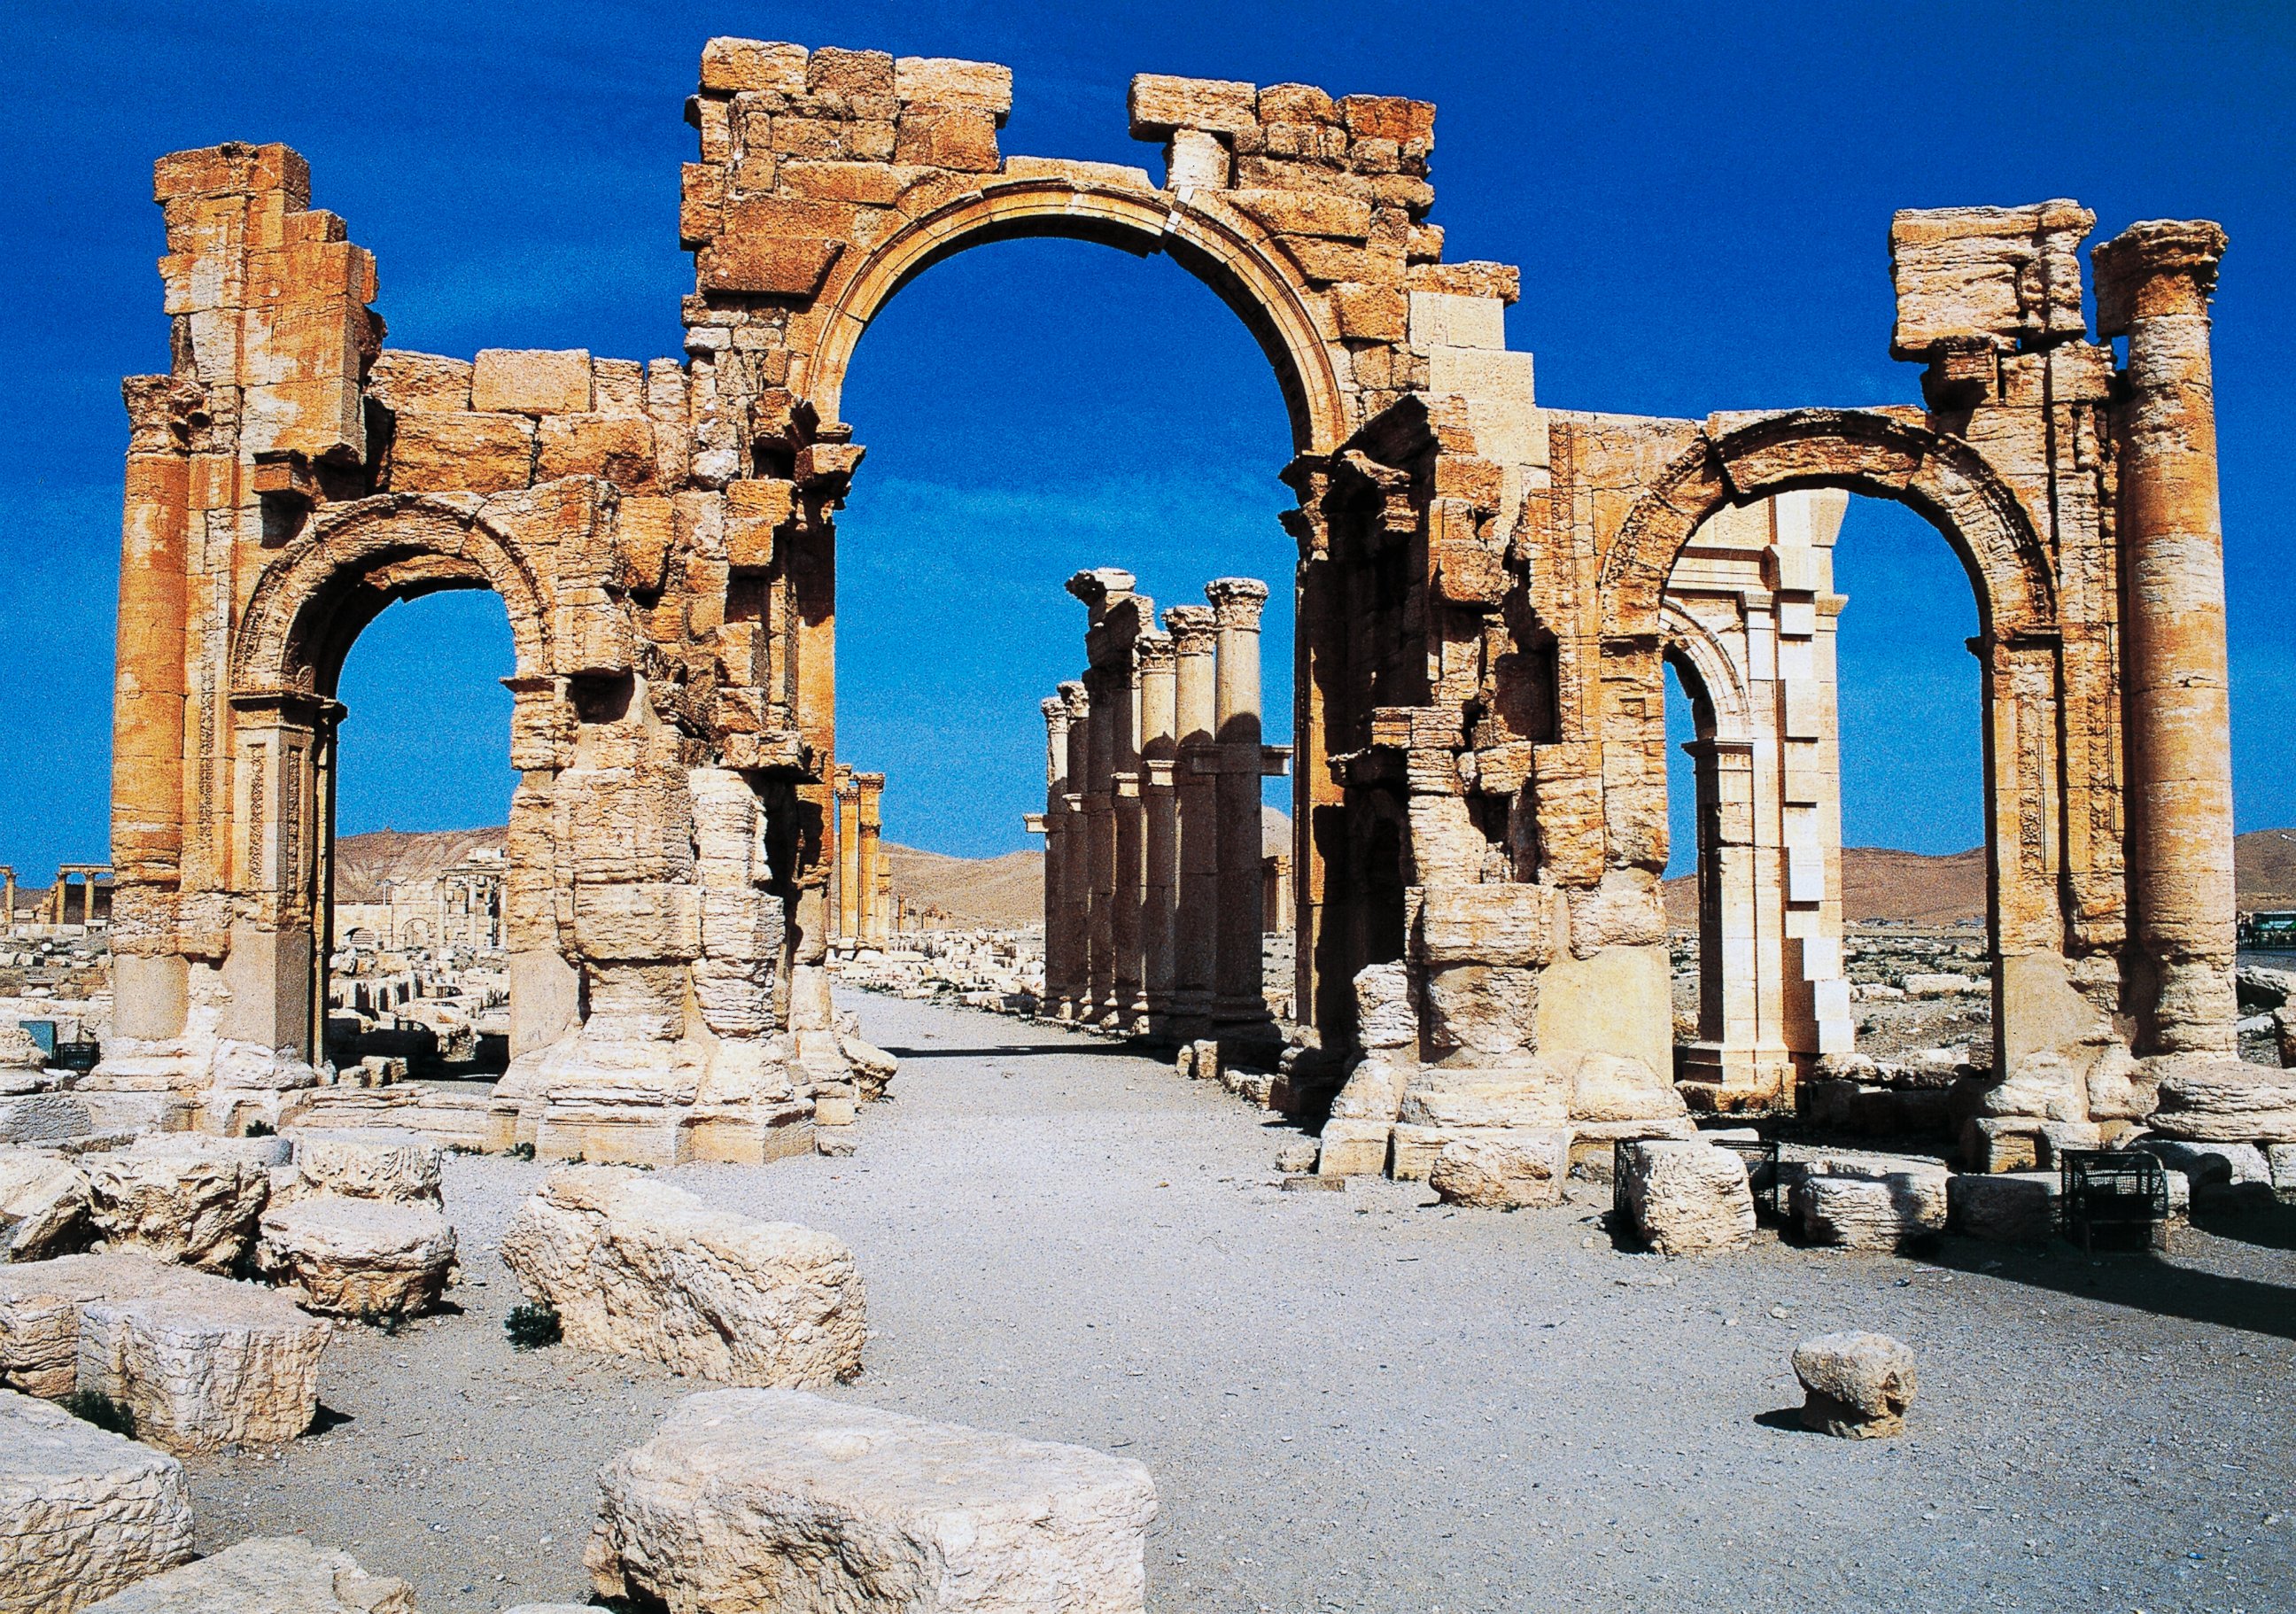 PHOTO: The Triumphal Arch of Septimius Severus in Palmyra (Unesco World Heritage List, 1980), Syria, shown in this undated photo.